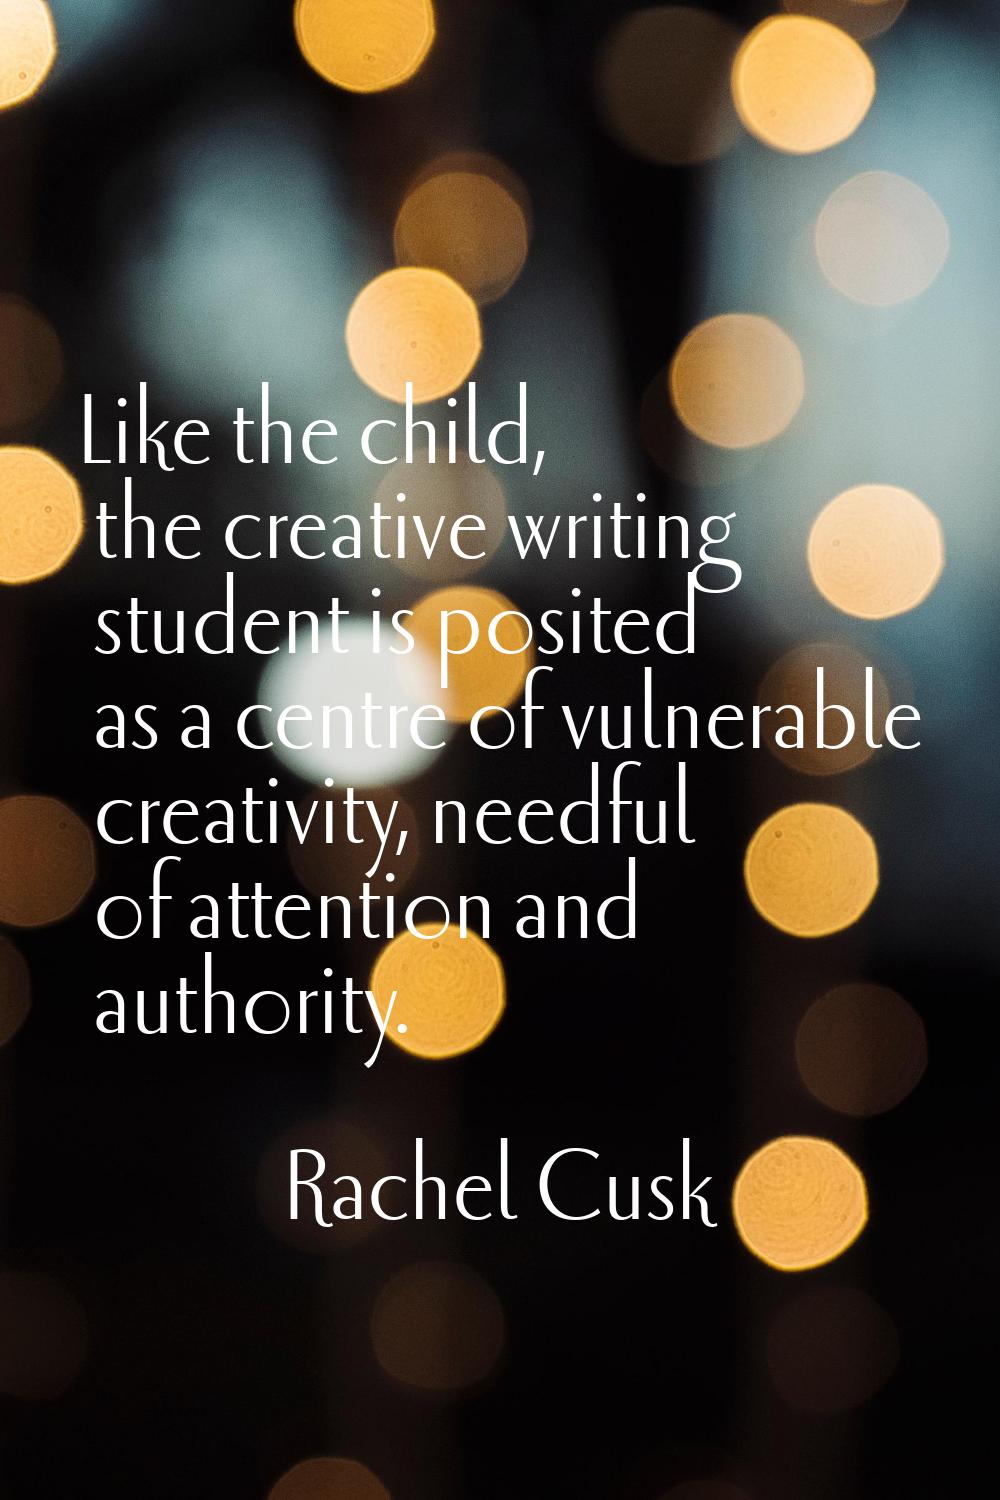 Like the child, the creative writing student is posited as a centre of vulnerable creativity, needf